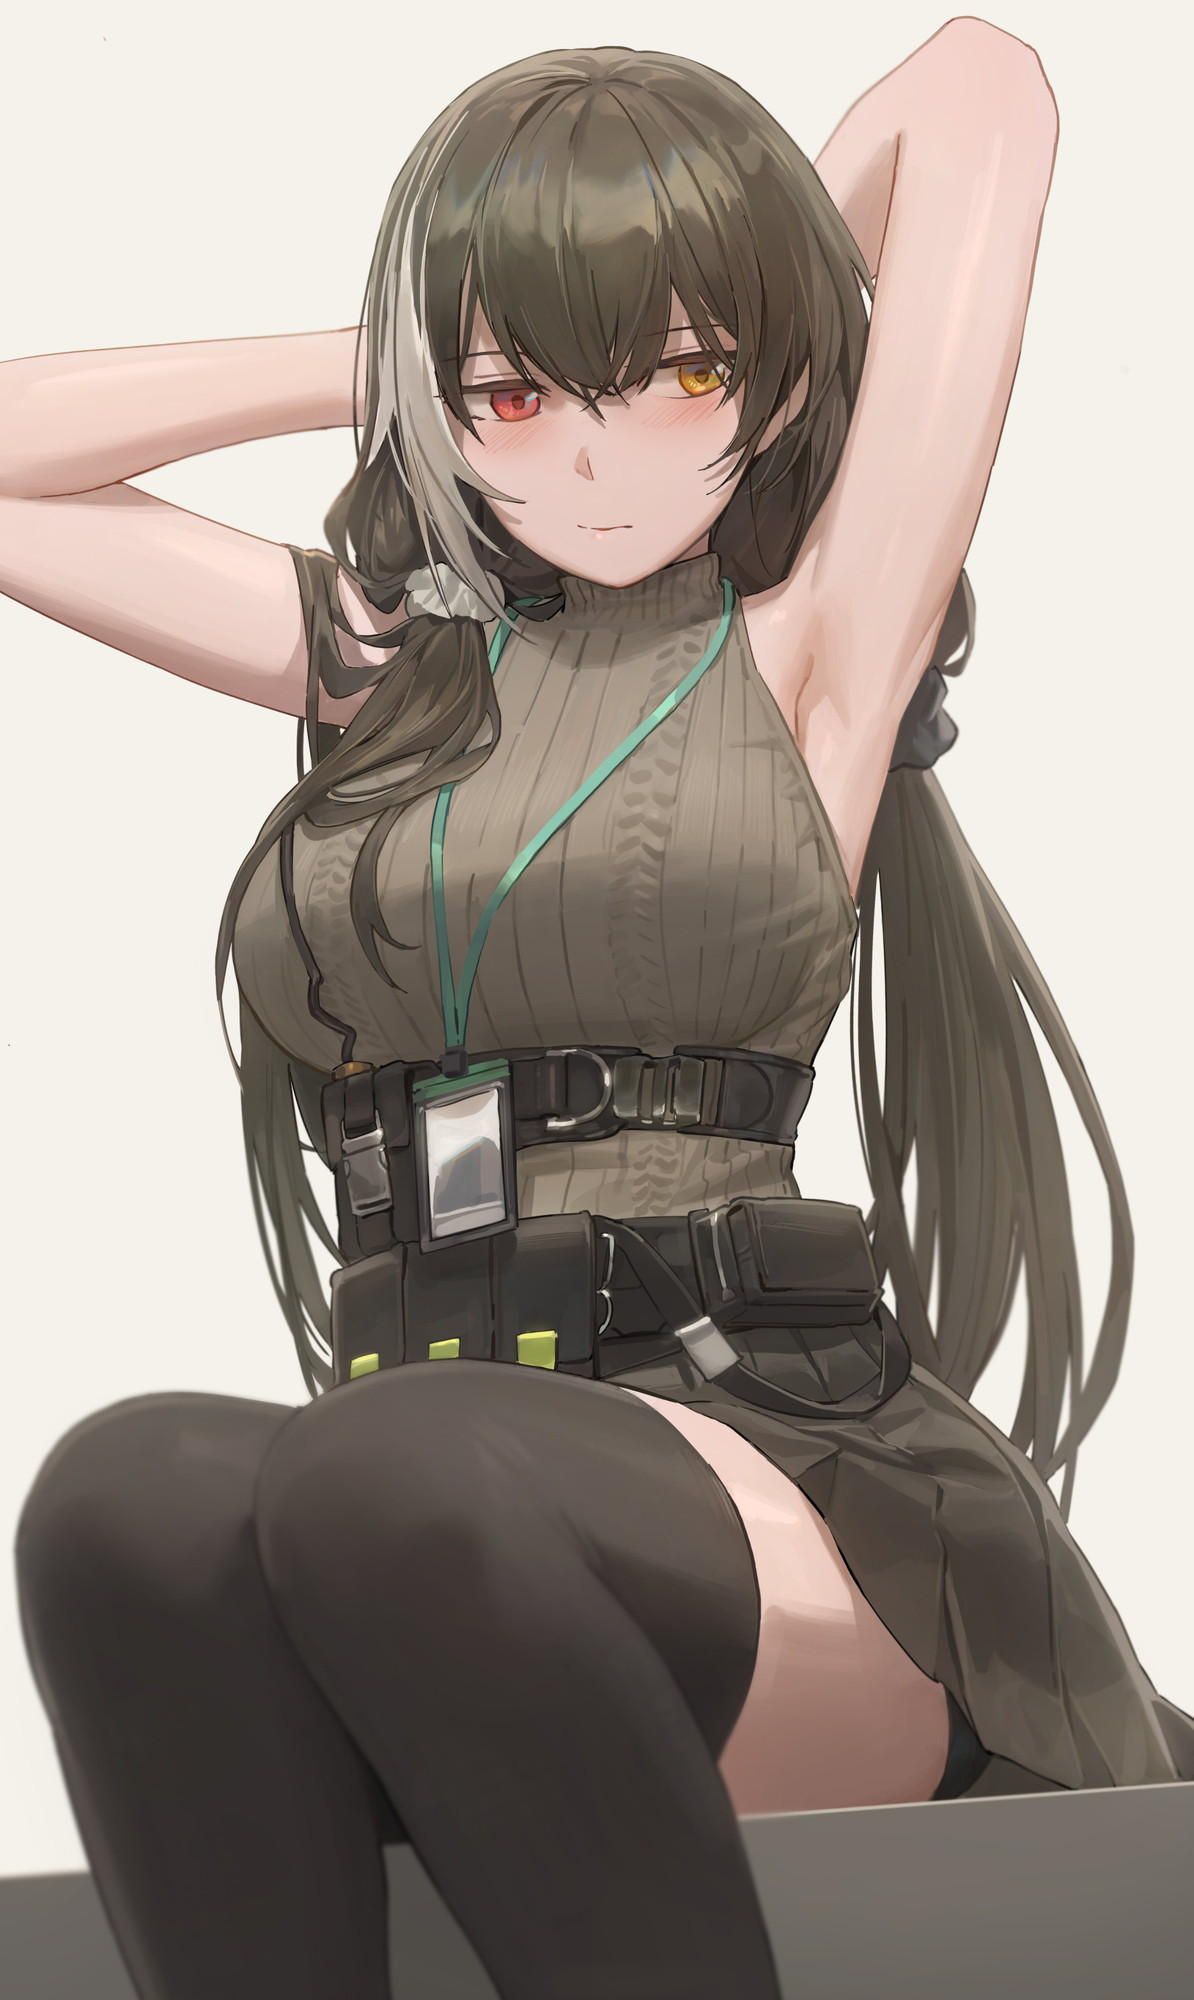 [Dolls Frontline] High-quality erotic images that can be used as RO635 wallpapers (PC/ smartphone) 11